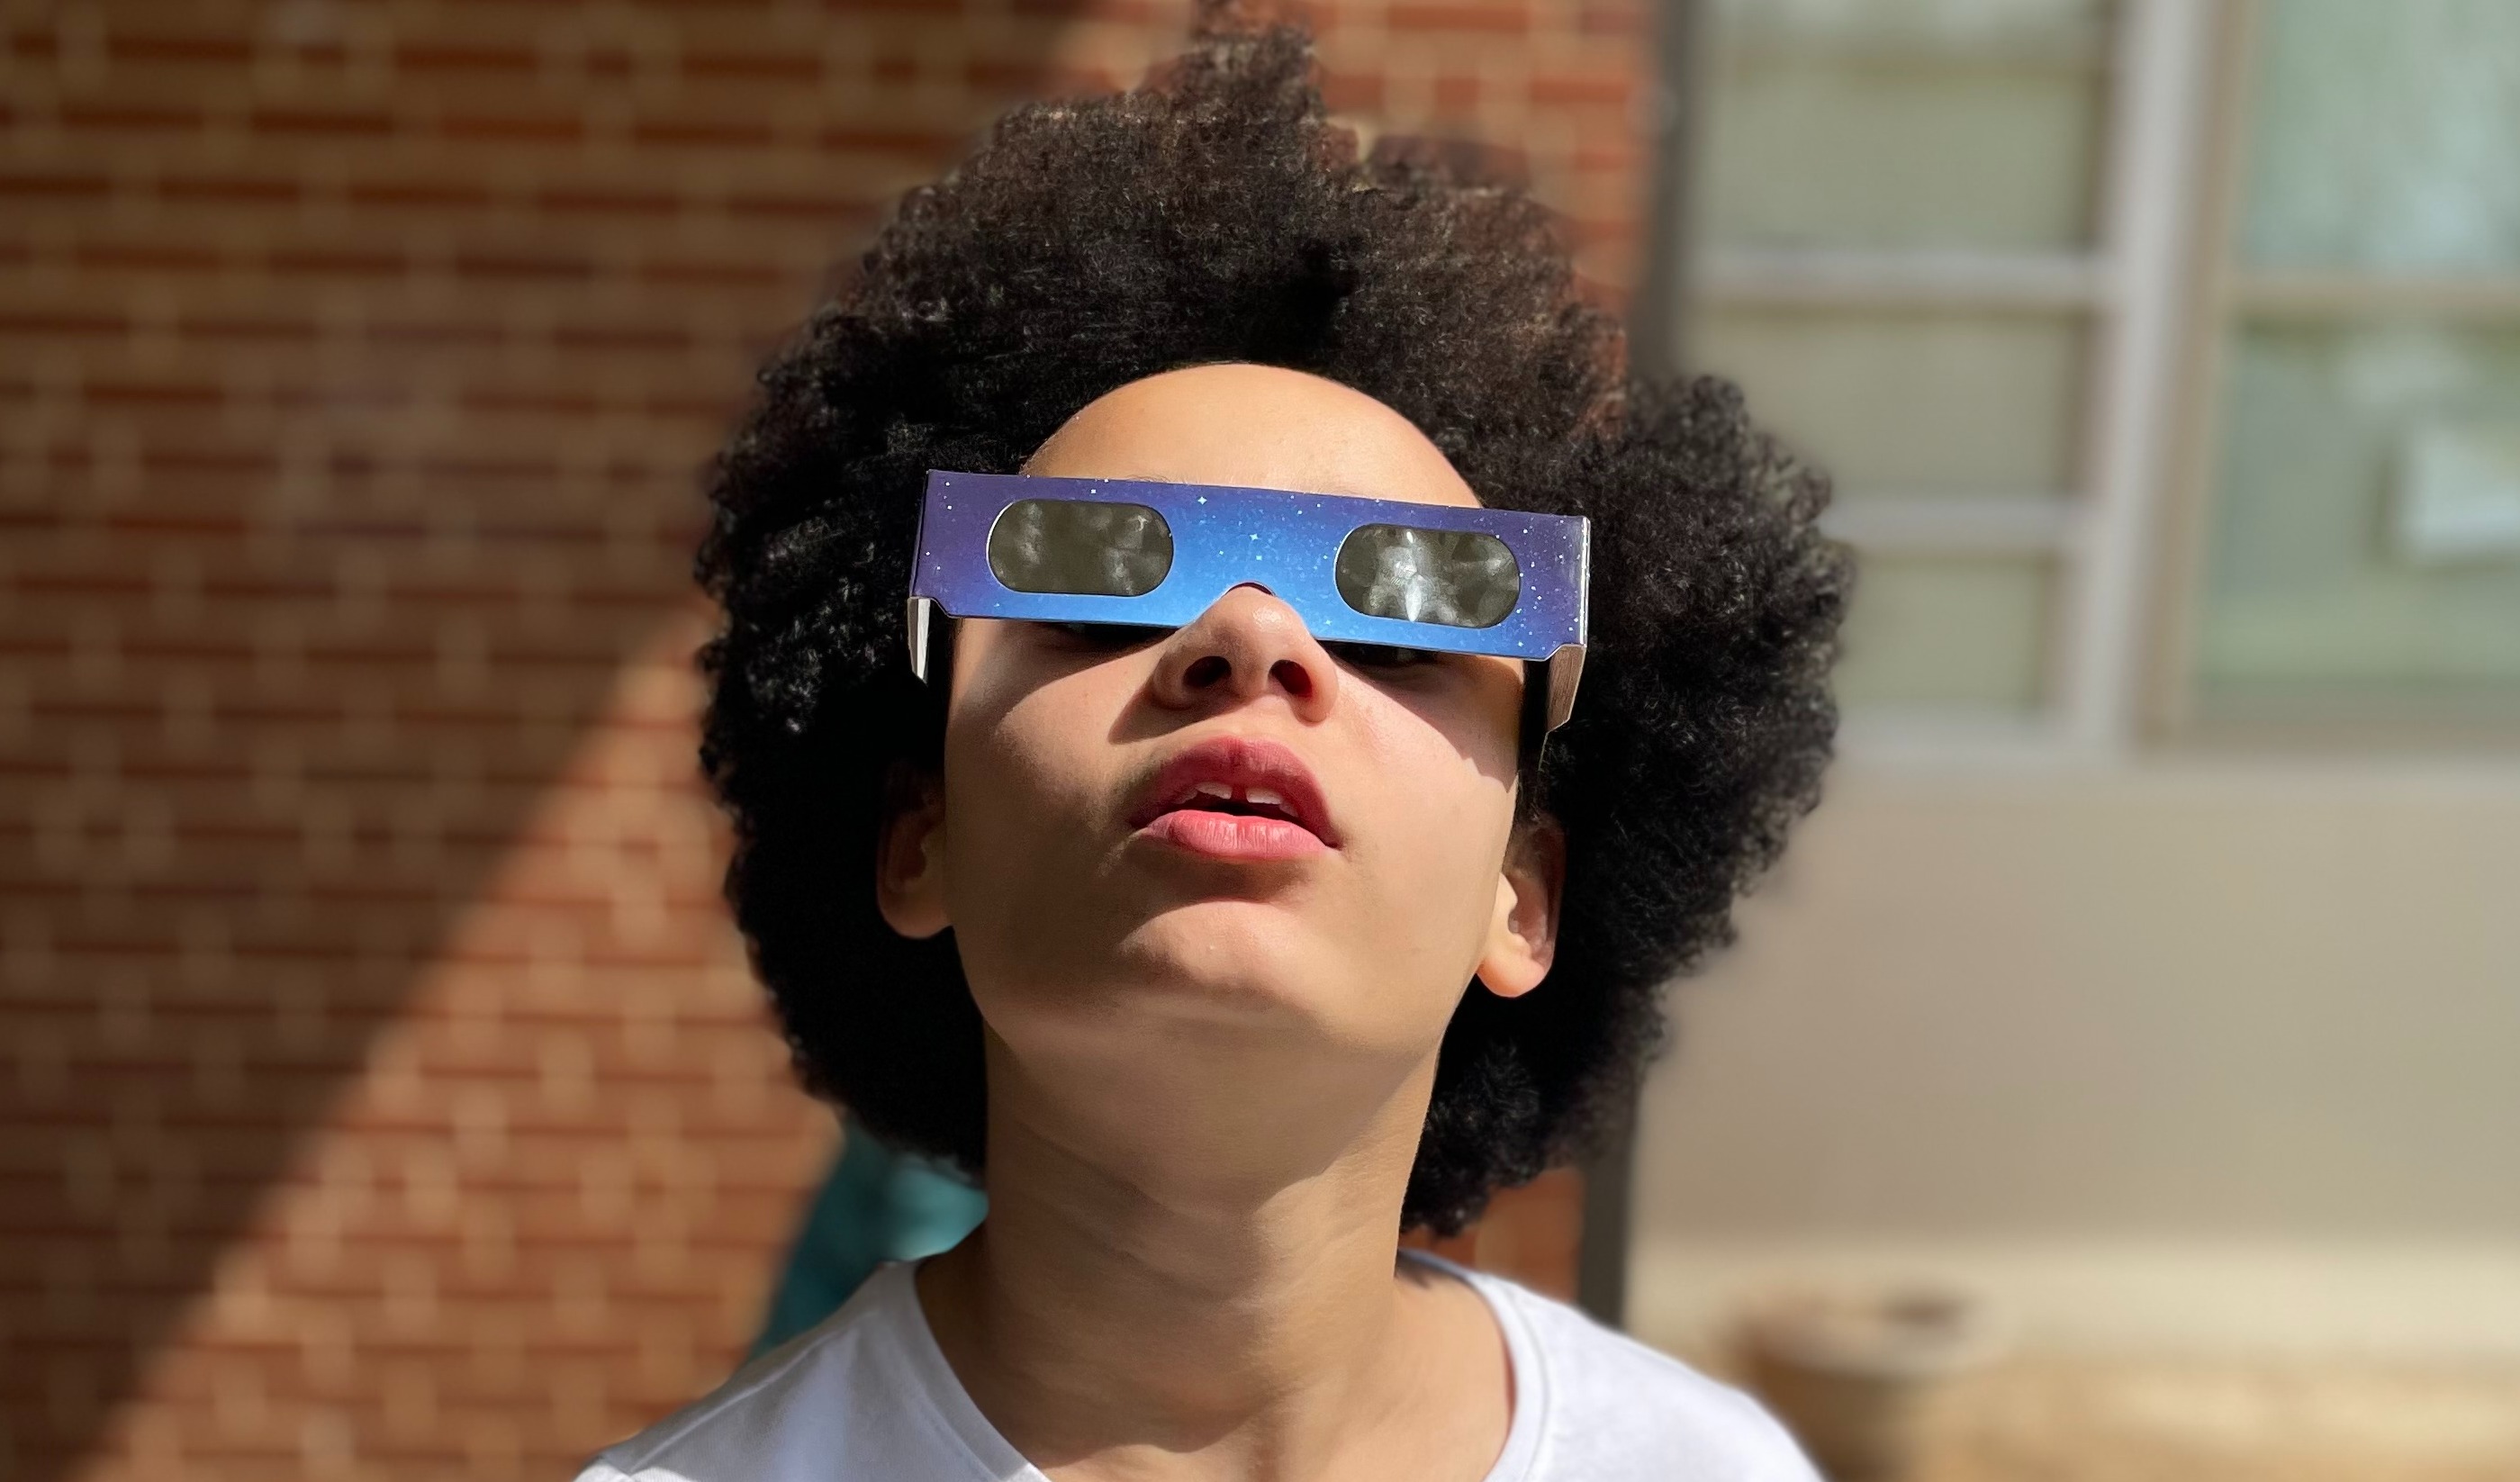 Cierra checking out the eclipse